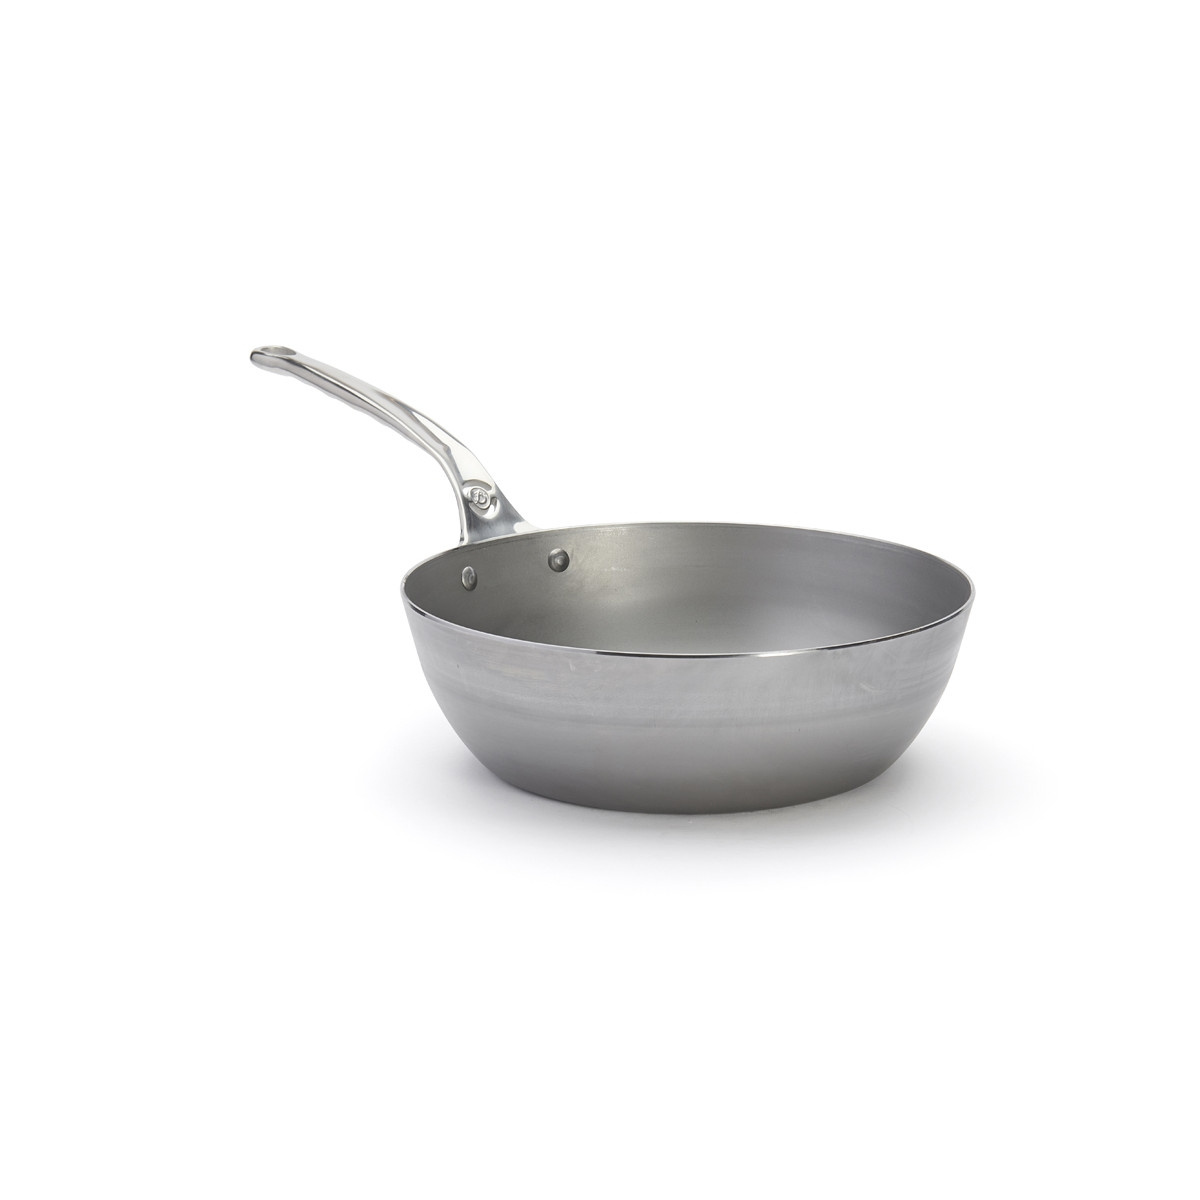 Sauteuse in carbon steel with stainless steel handle, 28cm, Mineral B Pro - de  Buyer - Shop online